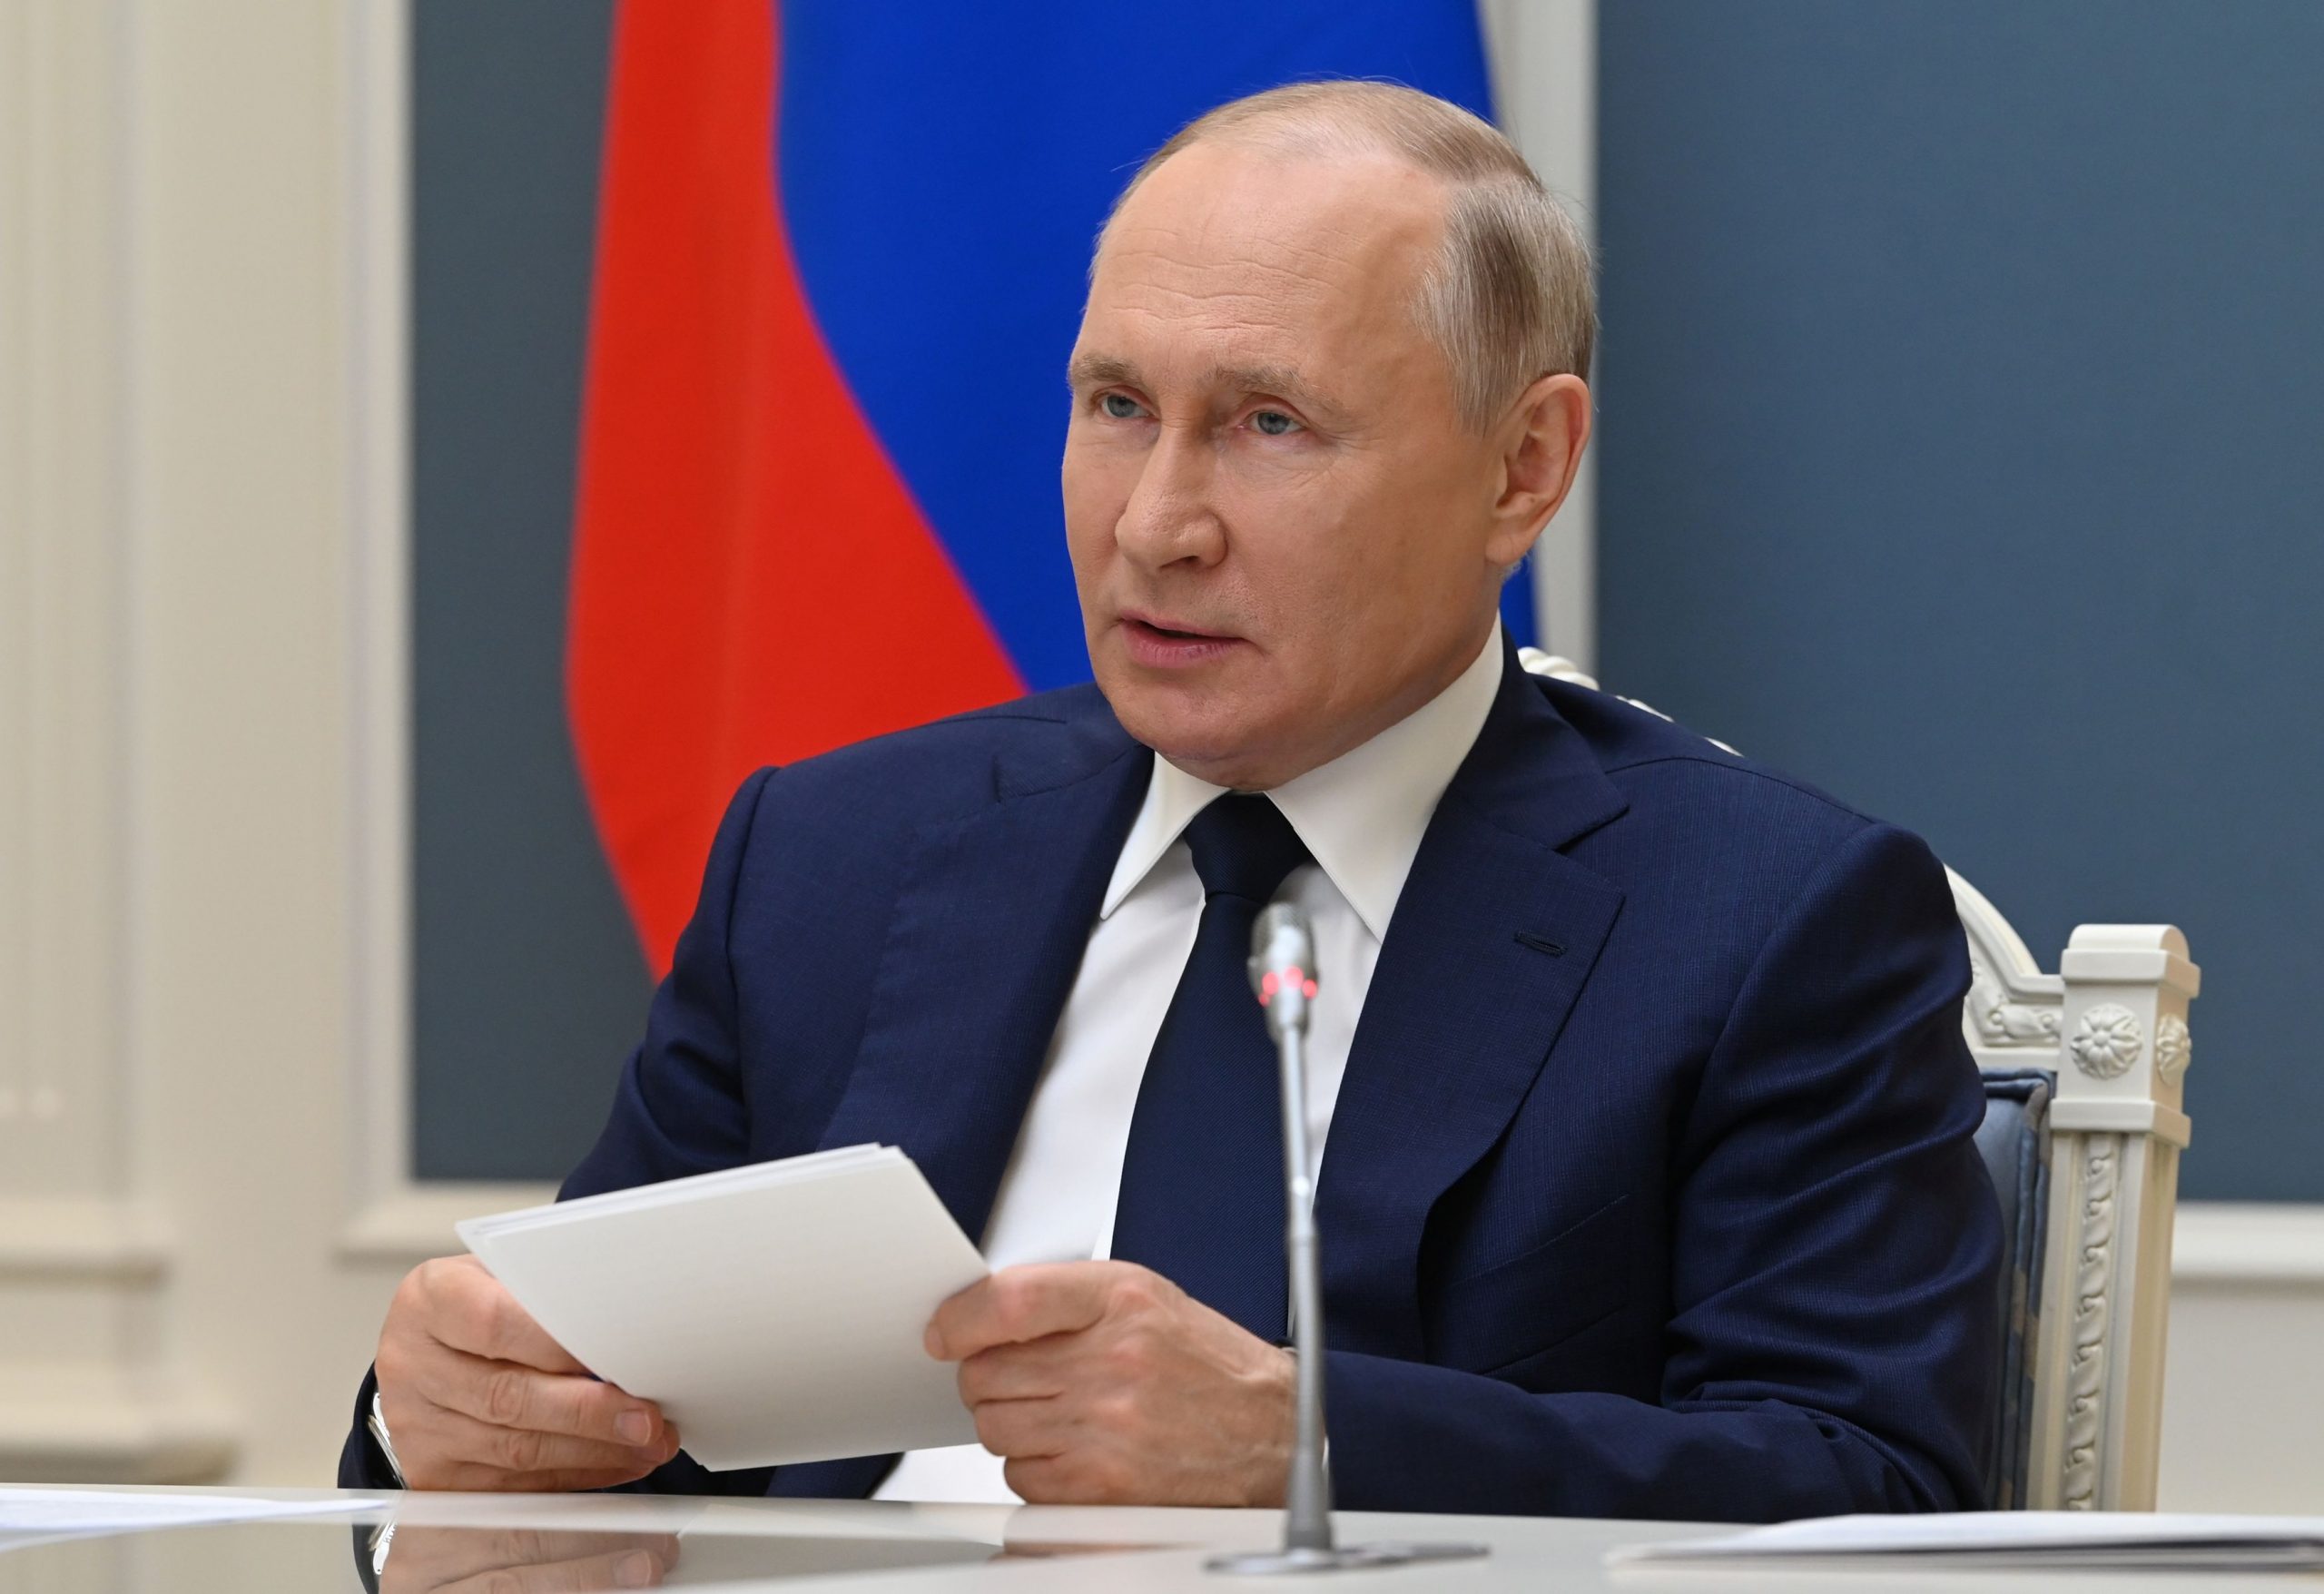 Putin – Turkey’s unilateral actions in Varosηα are unacceptable